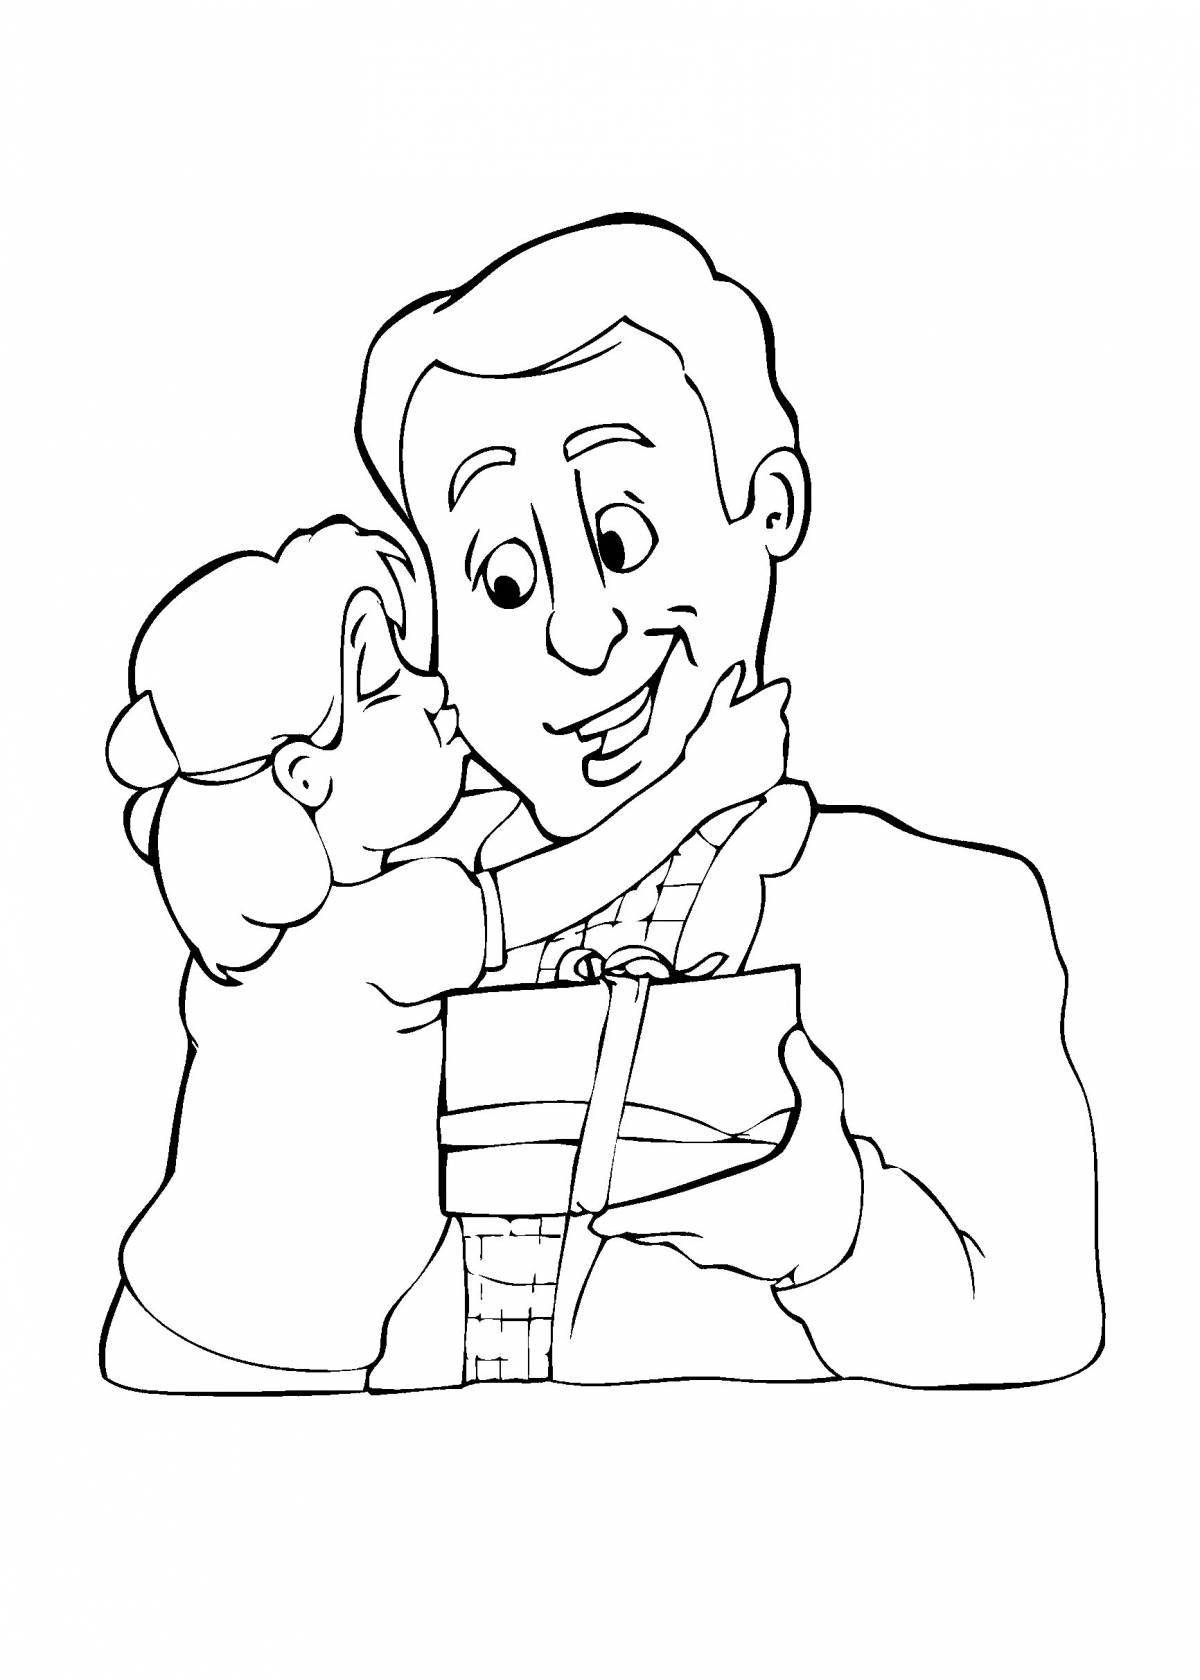 Fun coloring pages for dad and daughter